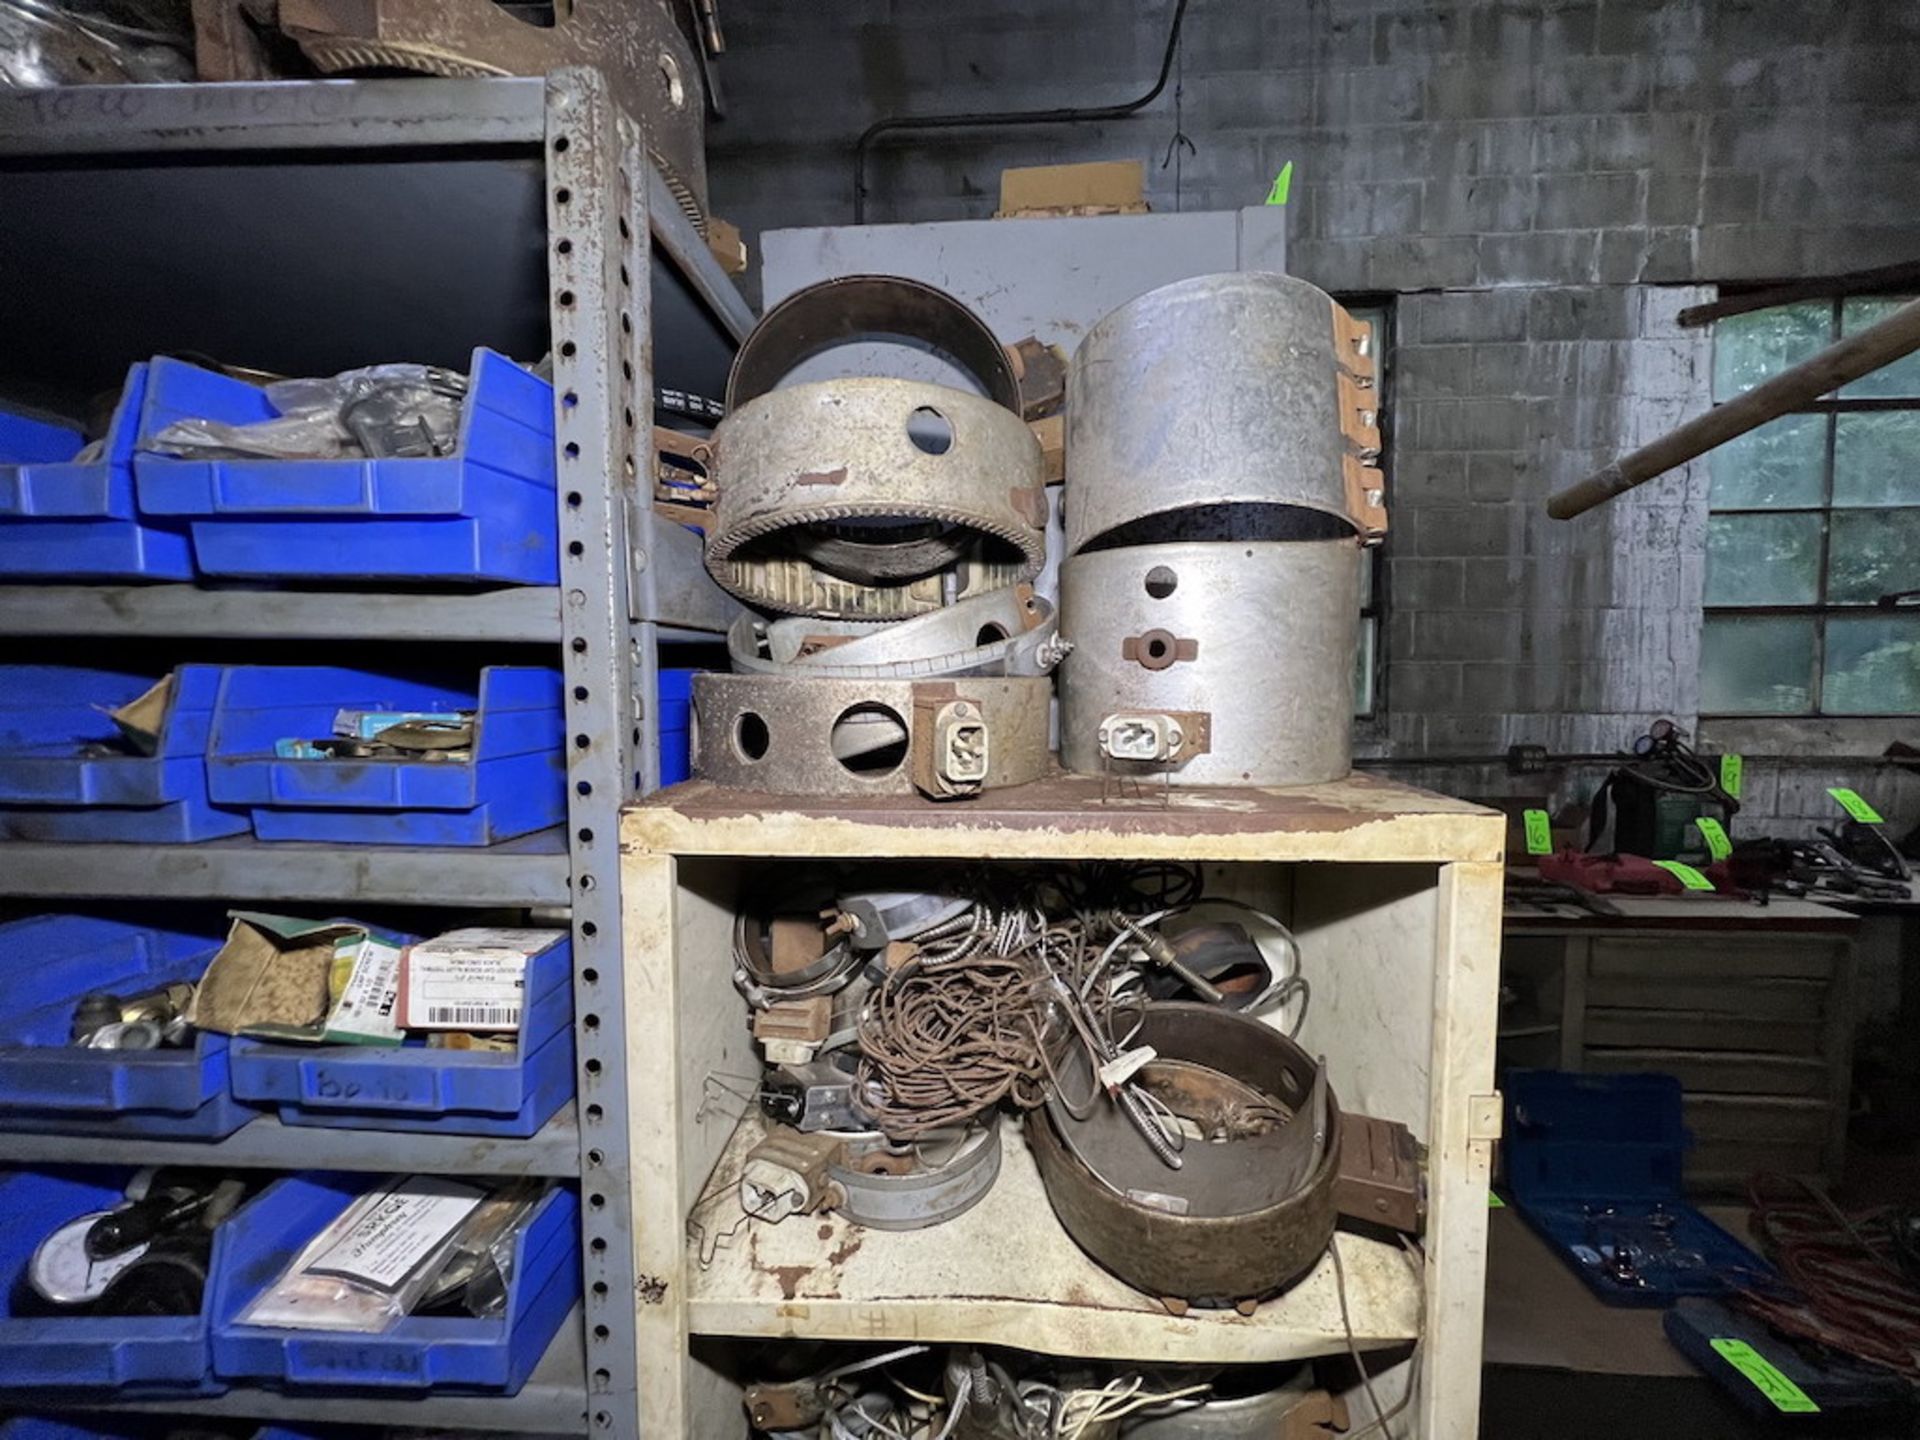 Remaining Contents of Parts Room - Image 41 of 60